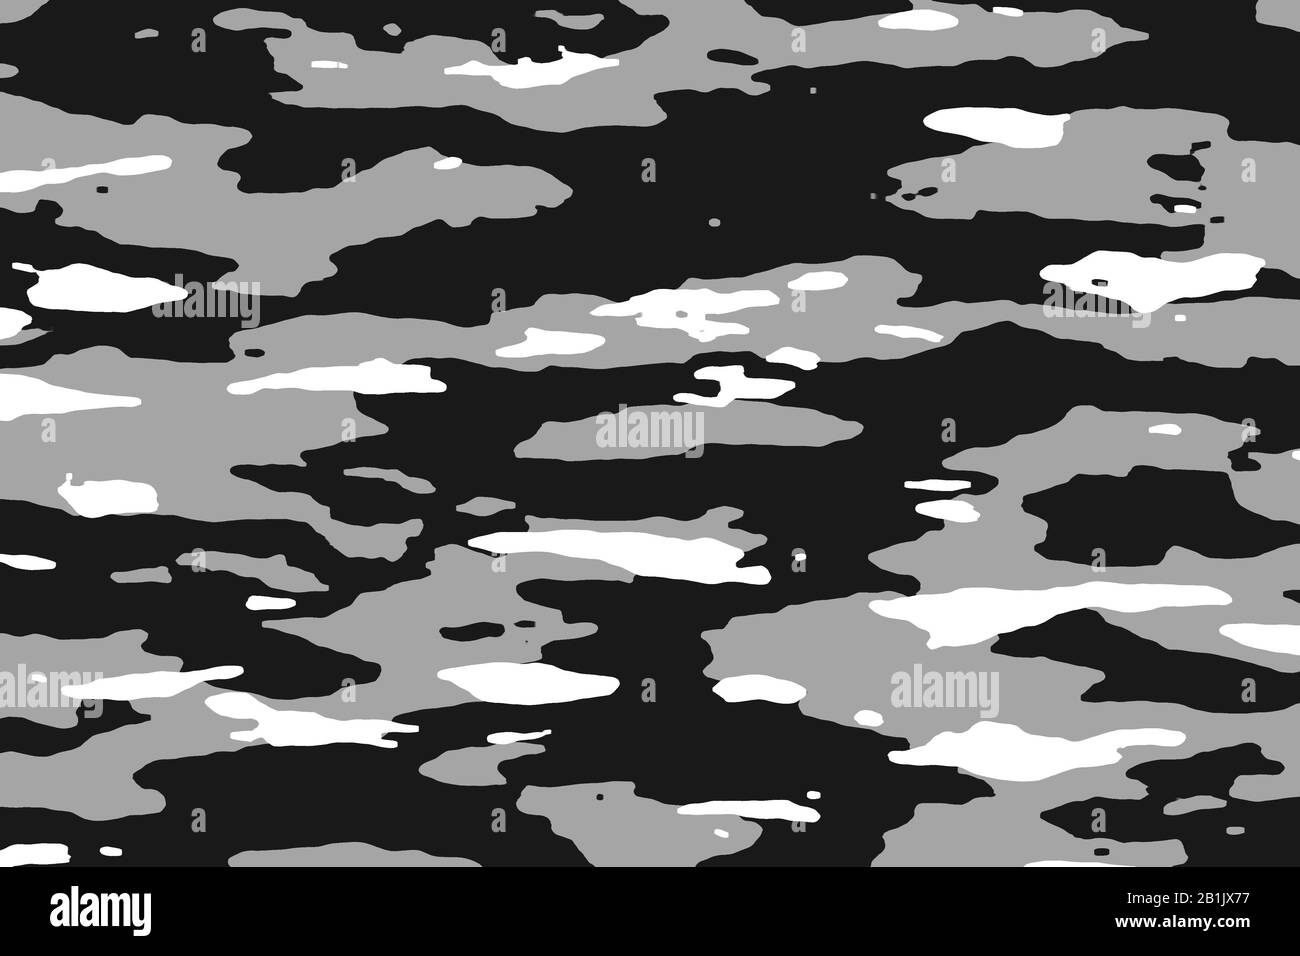 Black Camo Patterns - Its camo but its far more subtle than most other ...